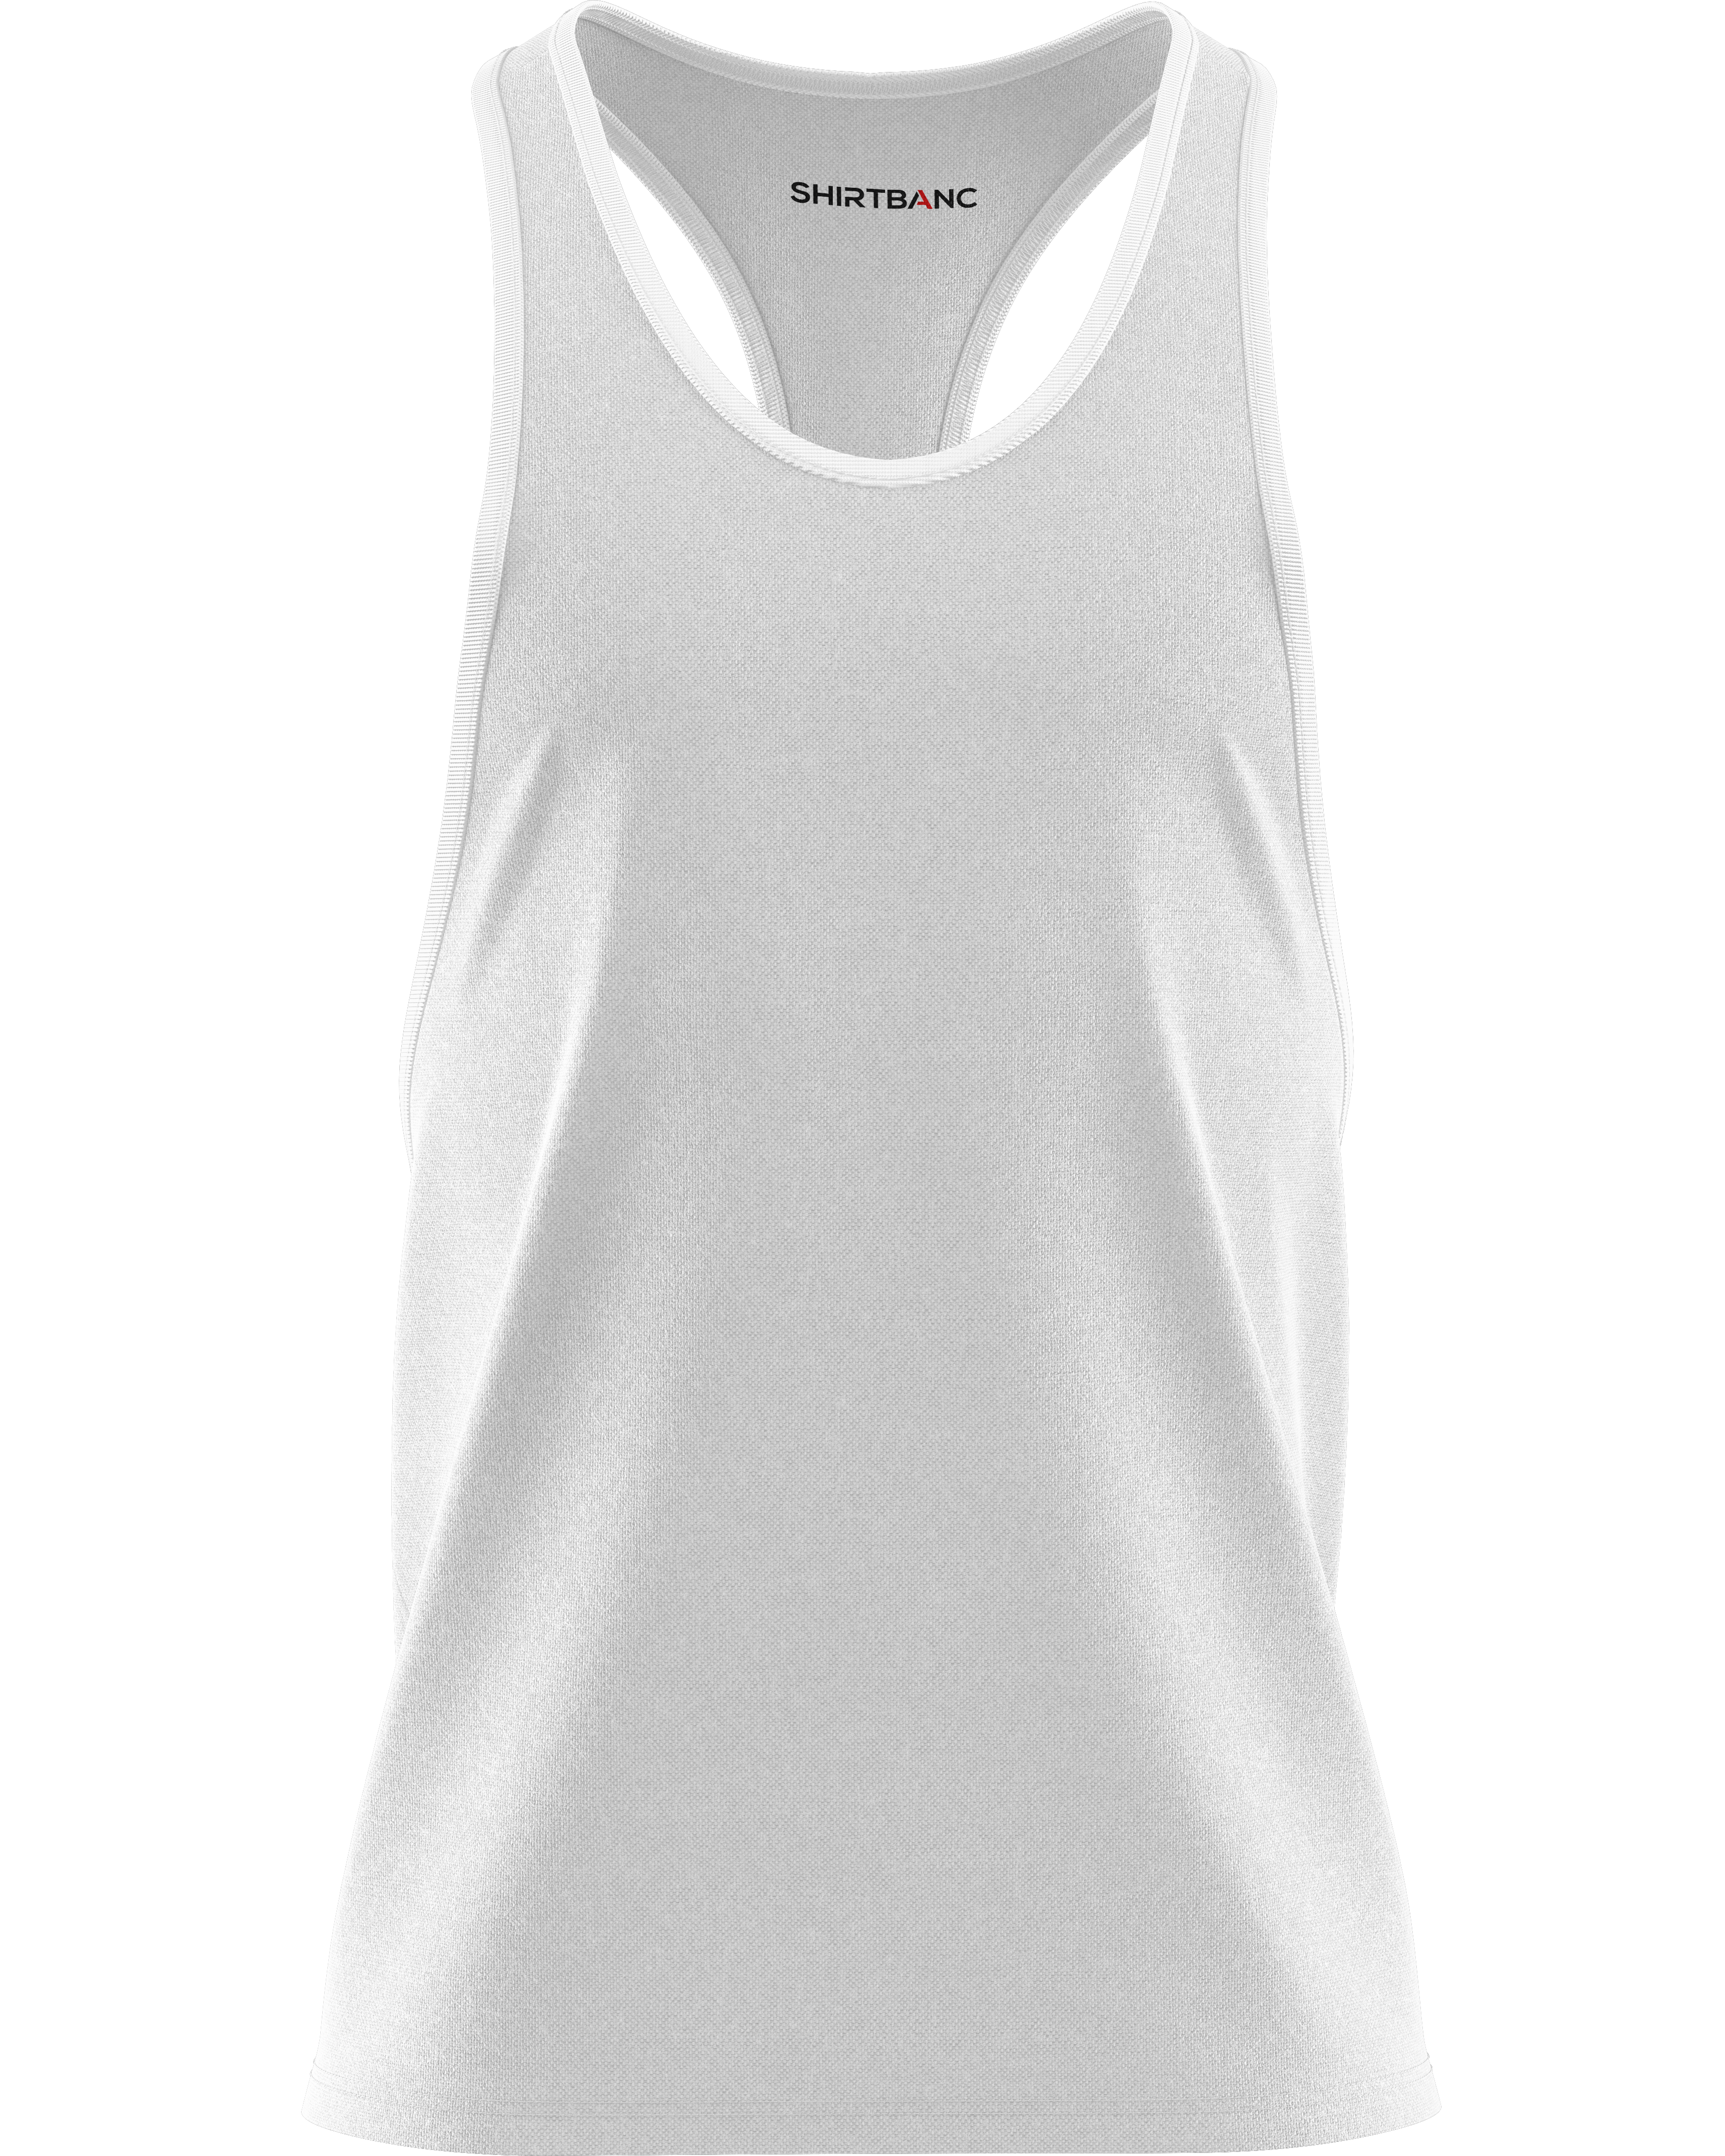 Essentials Unisex Racerback Cotton Tank Top Workout and Casual Wear